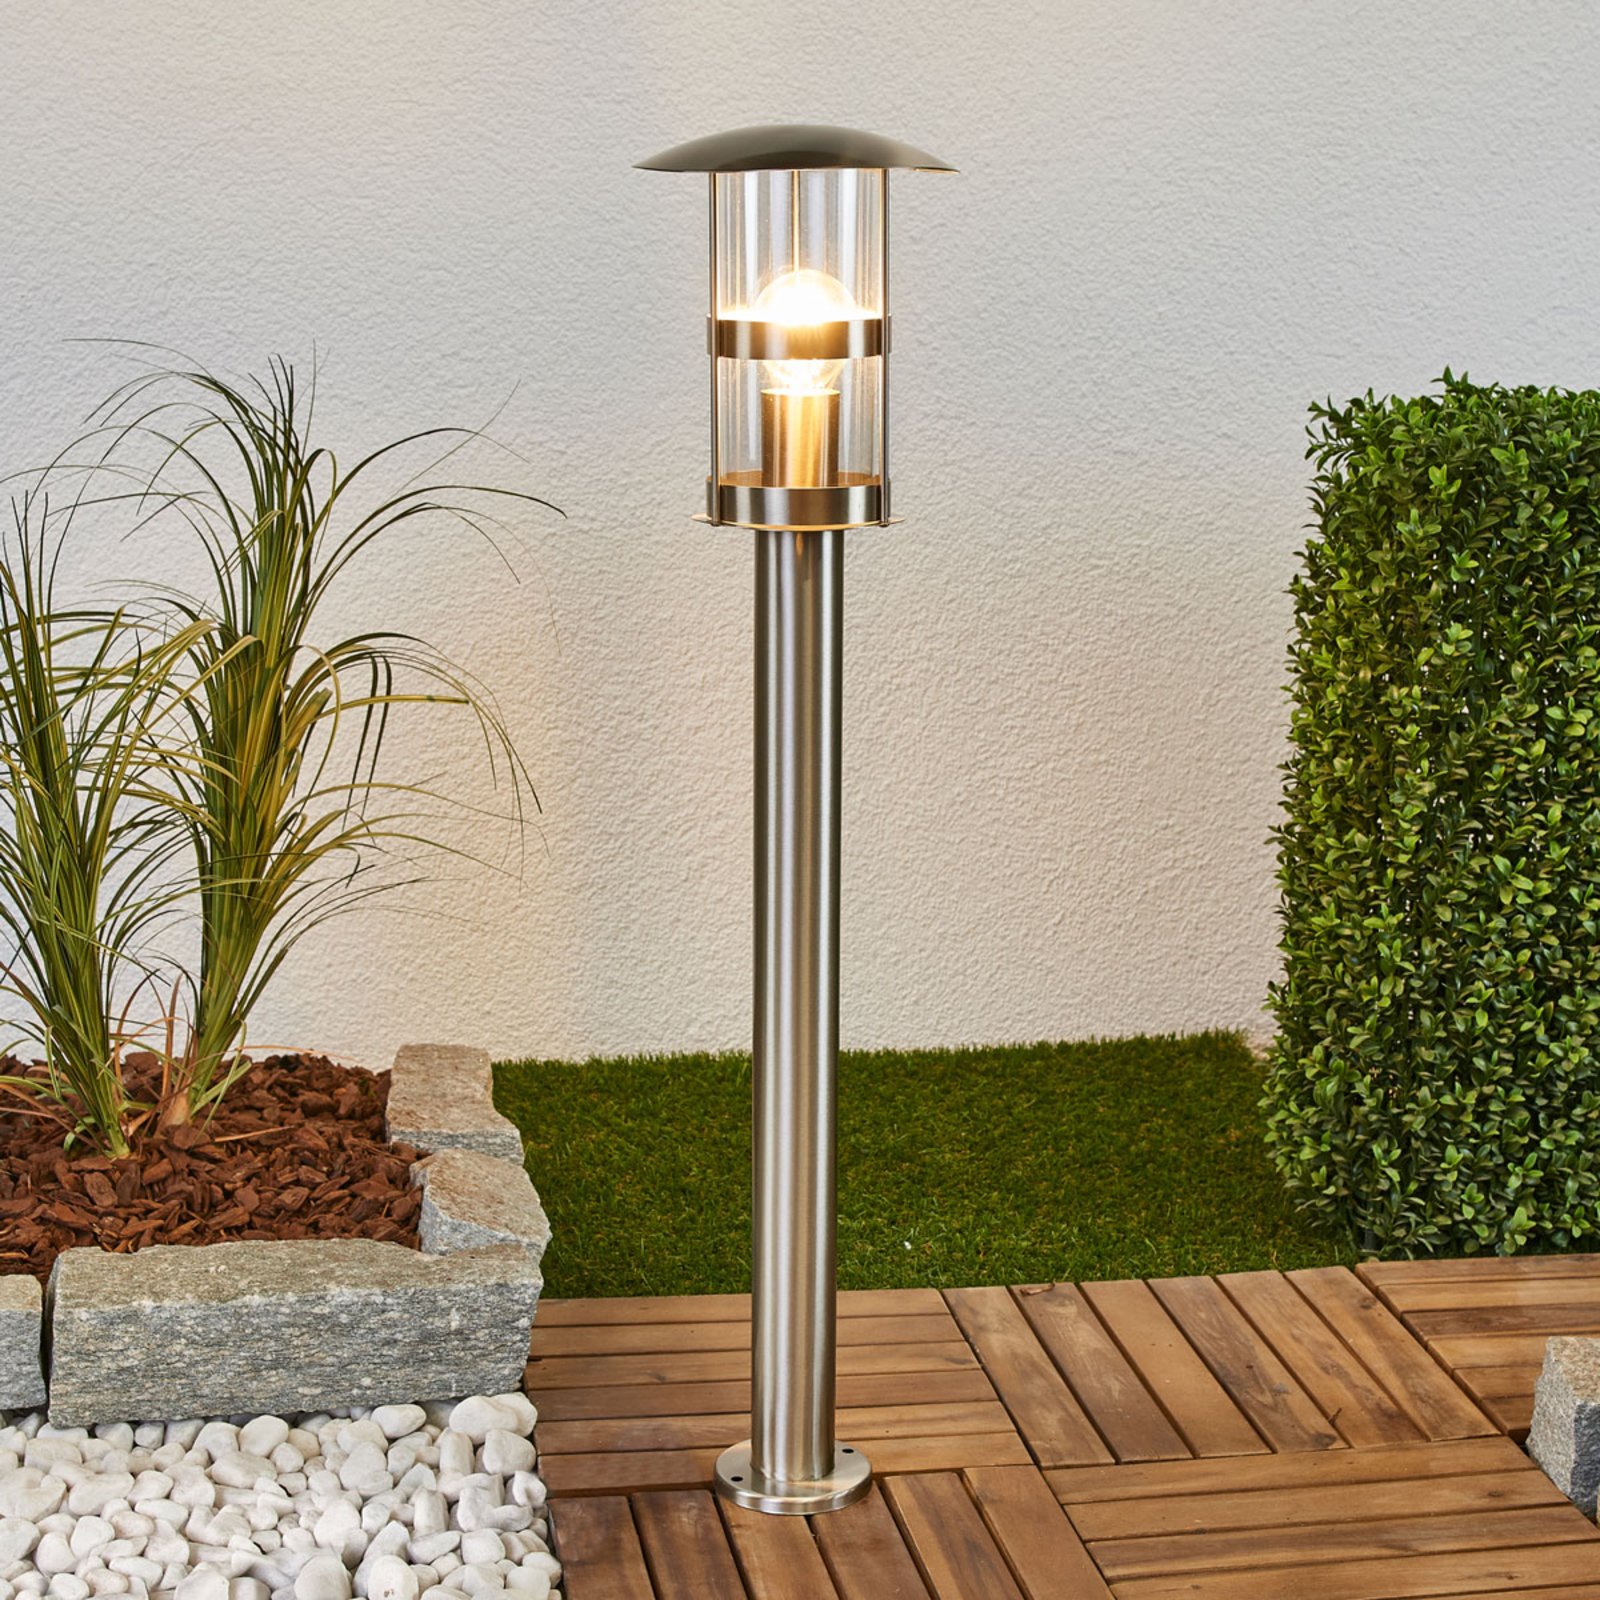 Noemi stainless steel path lamp for outdoors